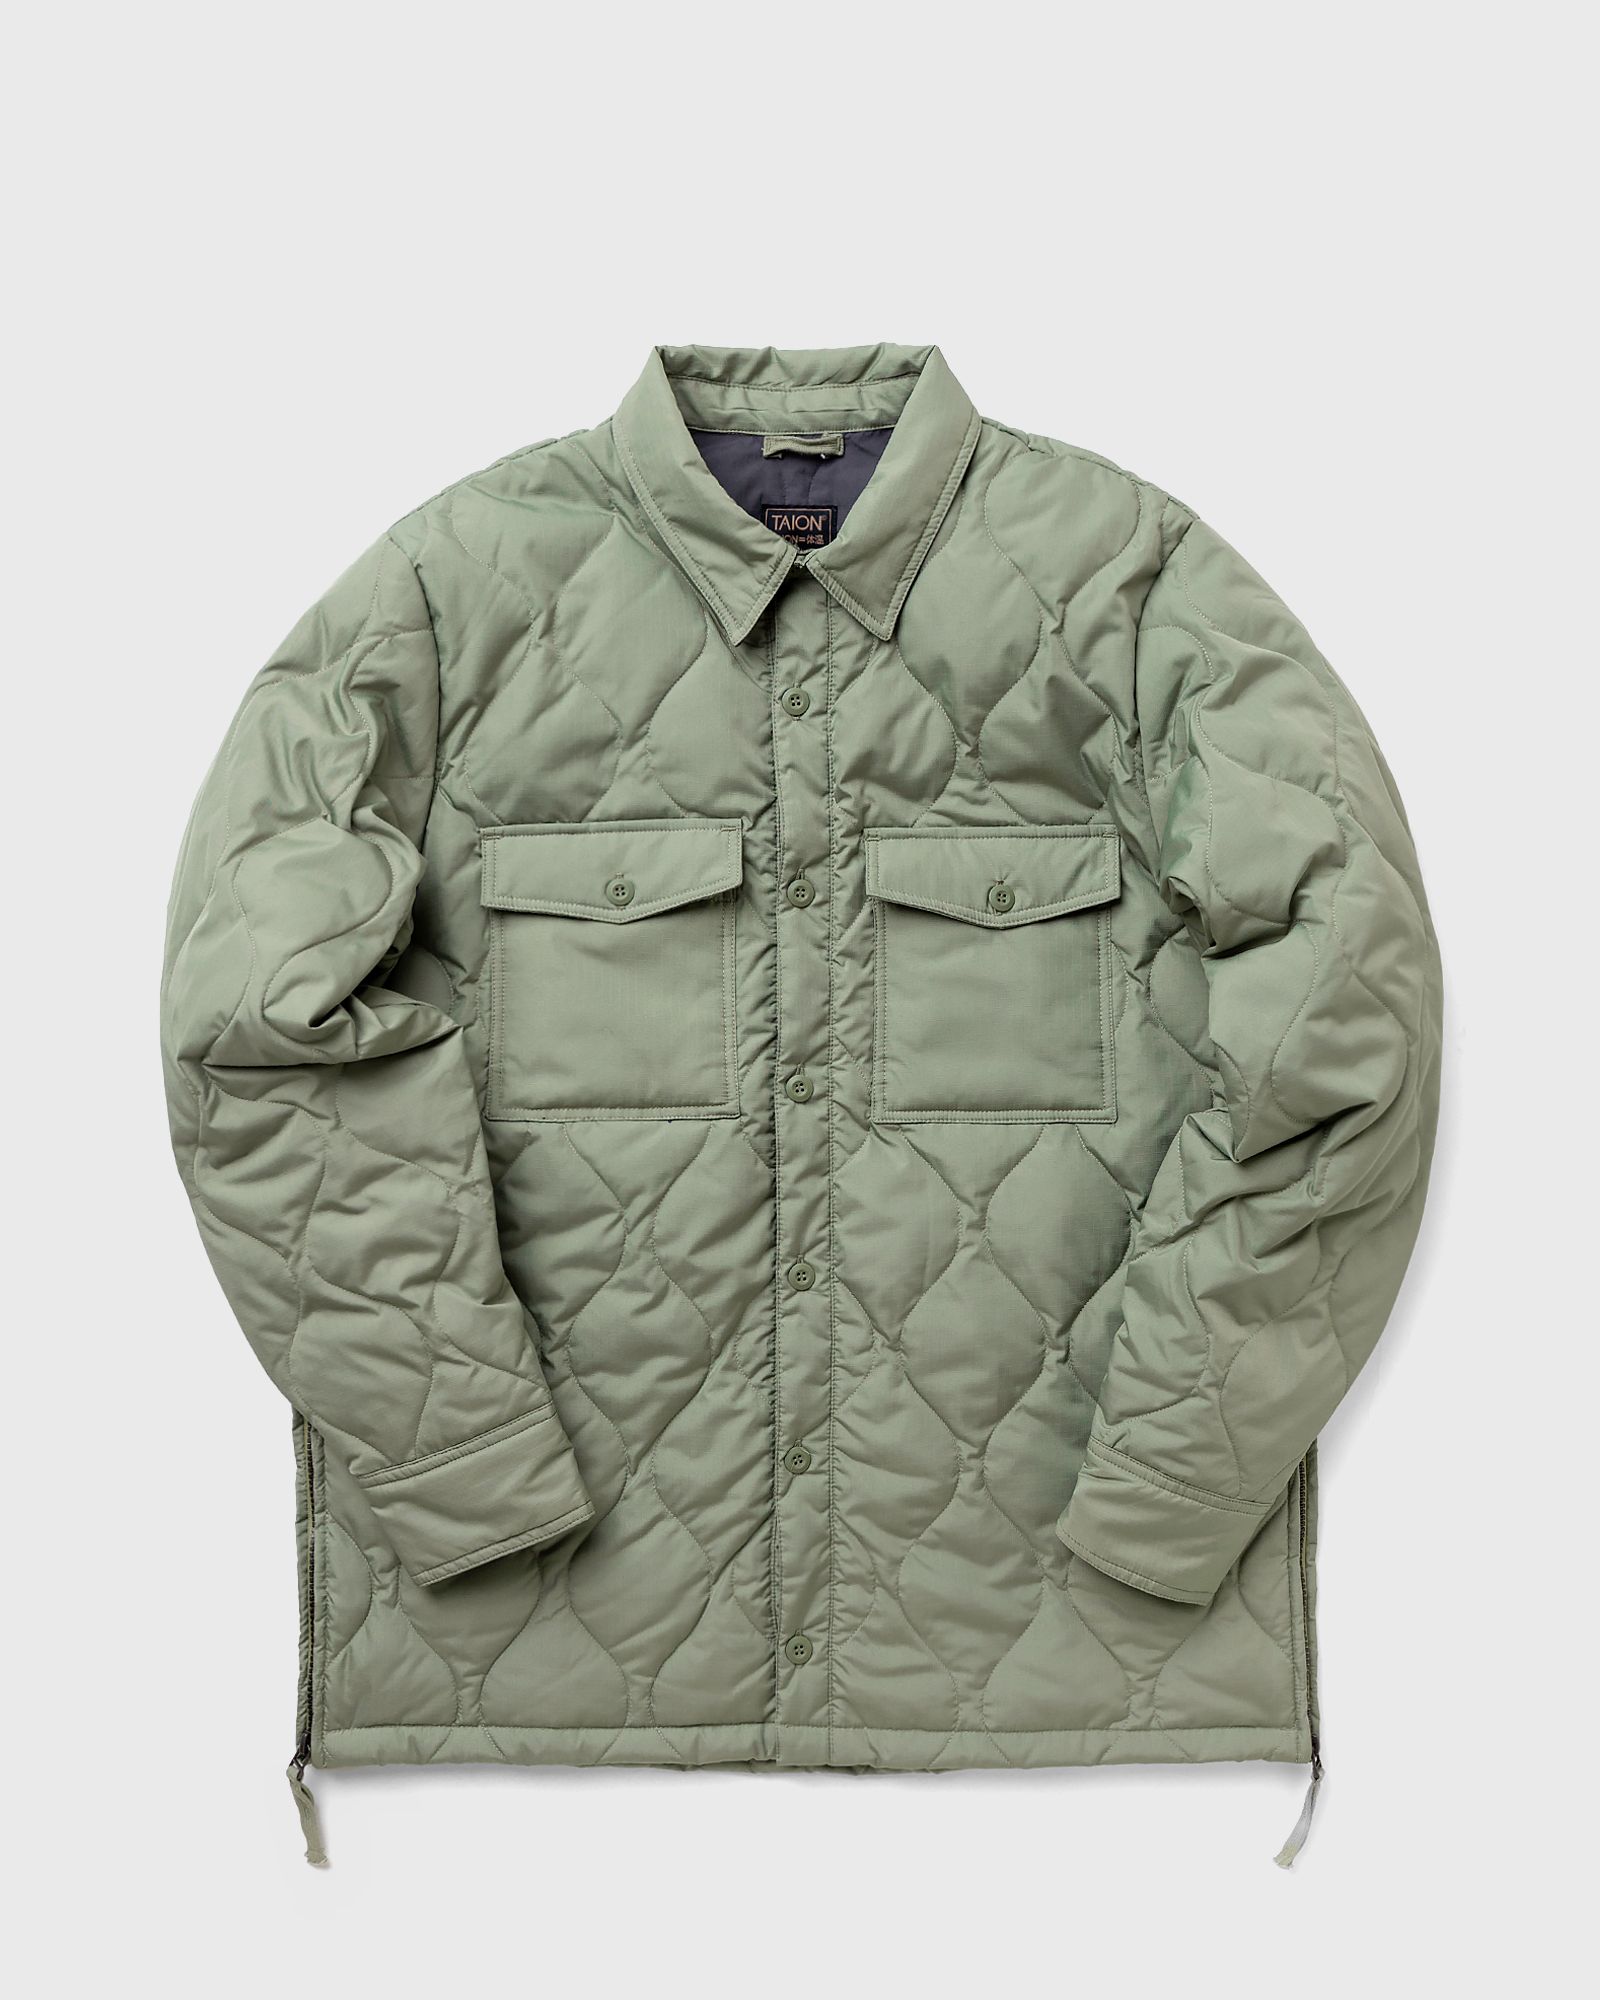 Taion - military shirts men down & puffer jackets|overshirts green in größe:s